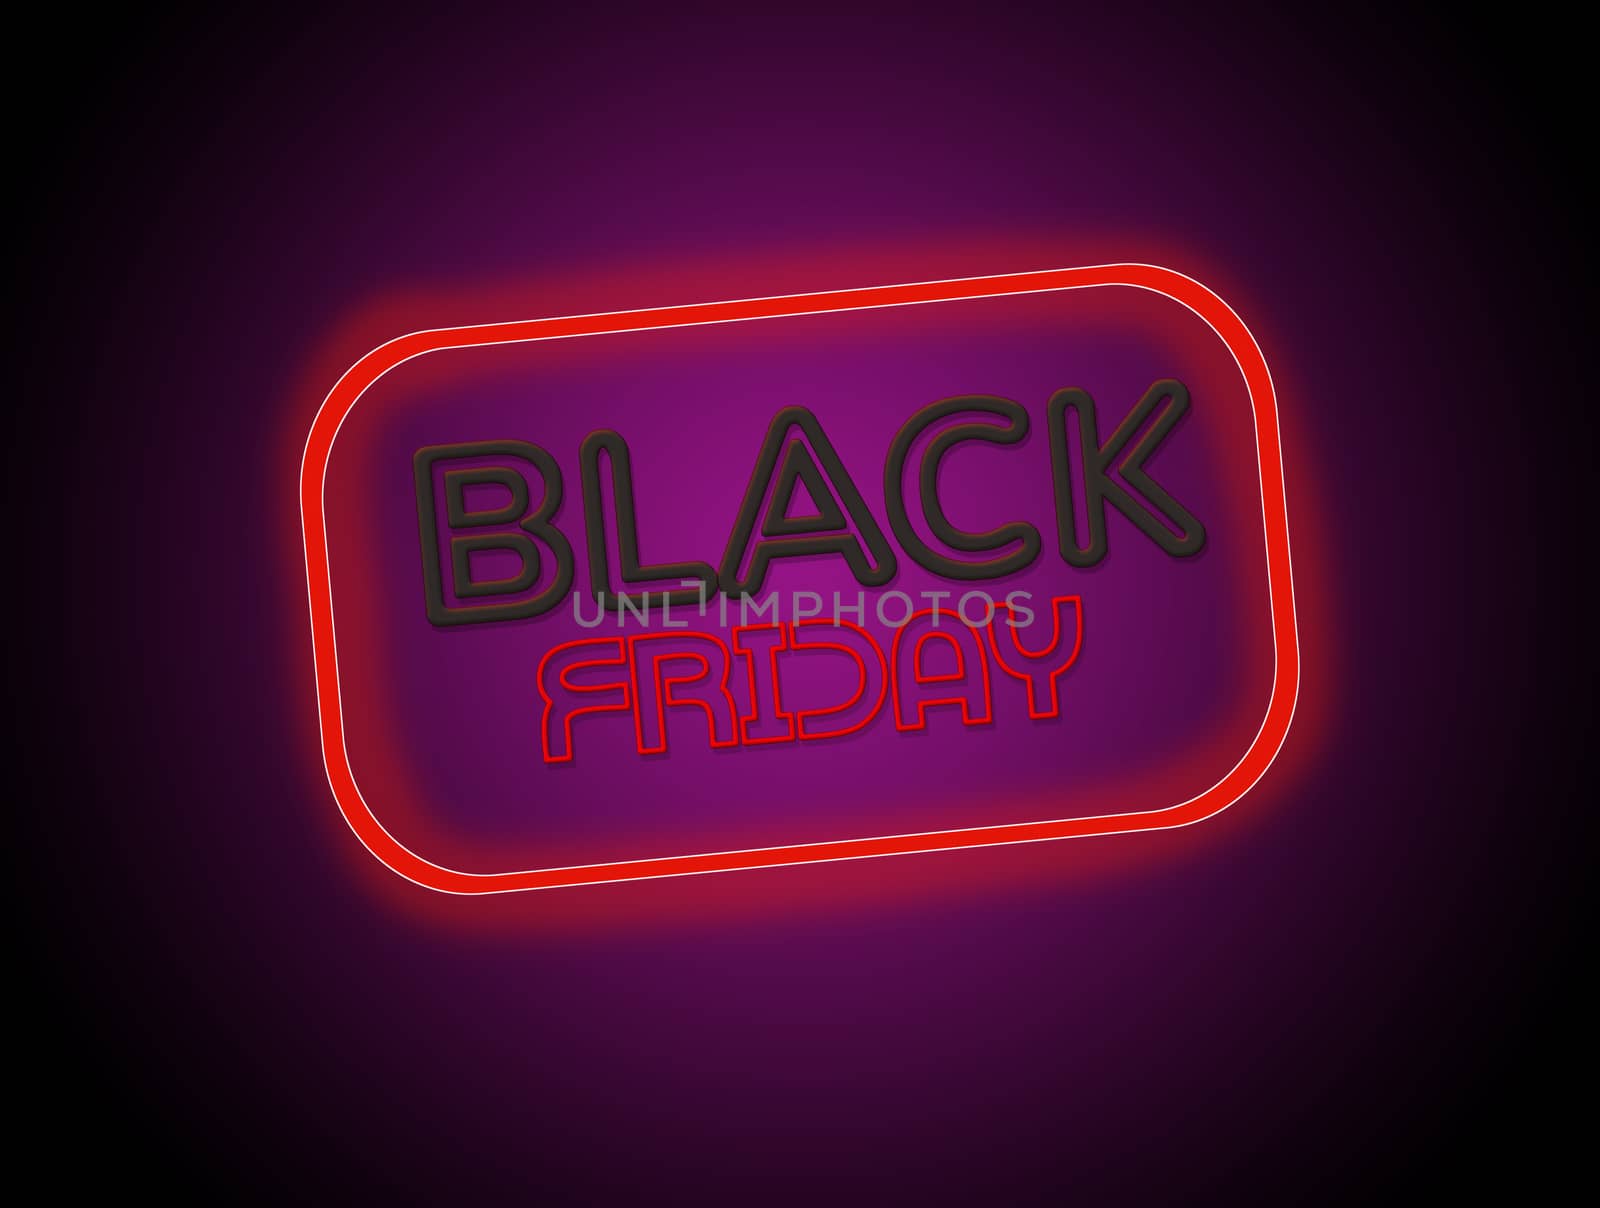 illustration of black friday banner on the wall